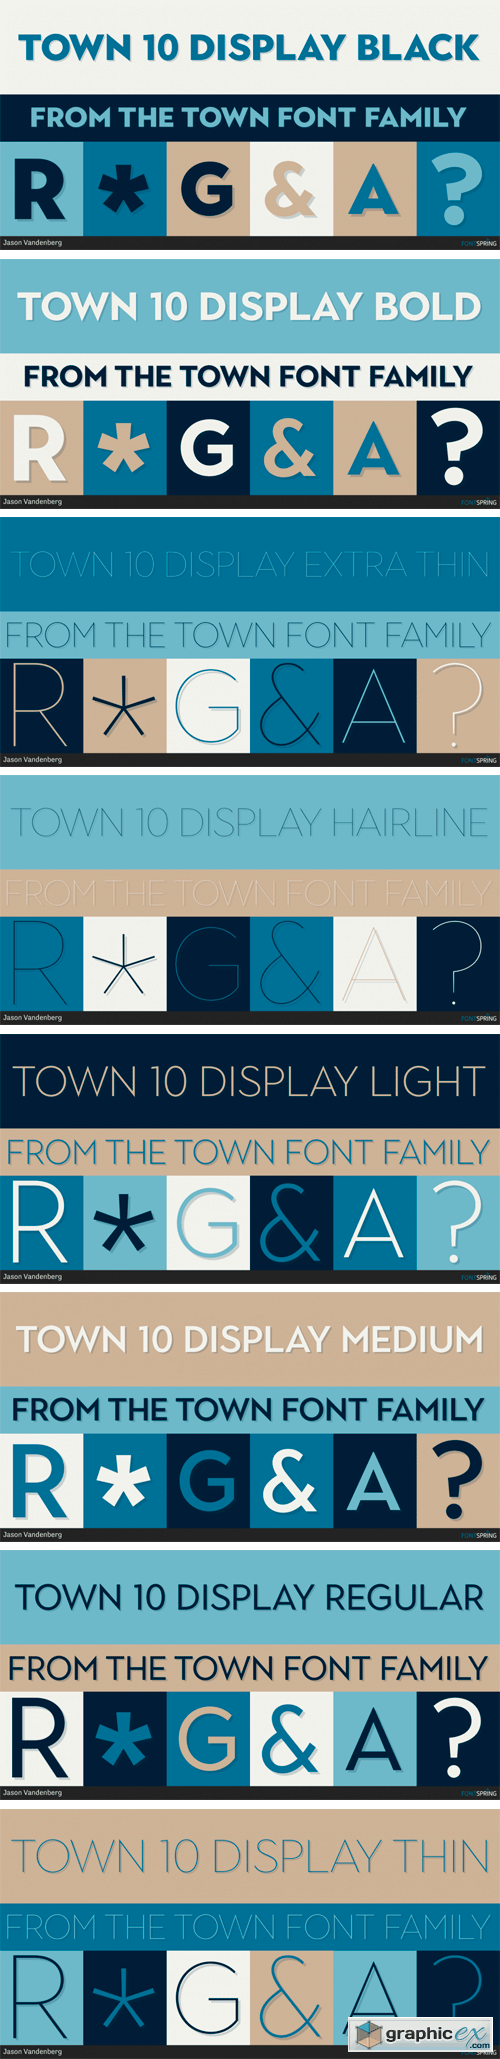 Town 10 Display Font Family